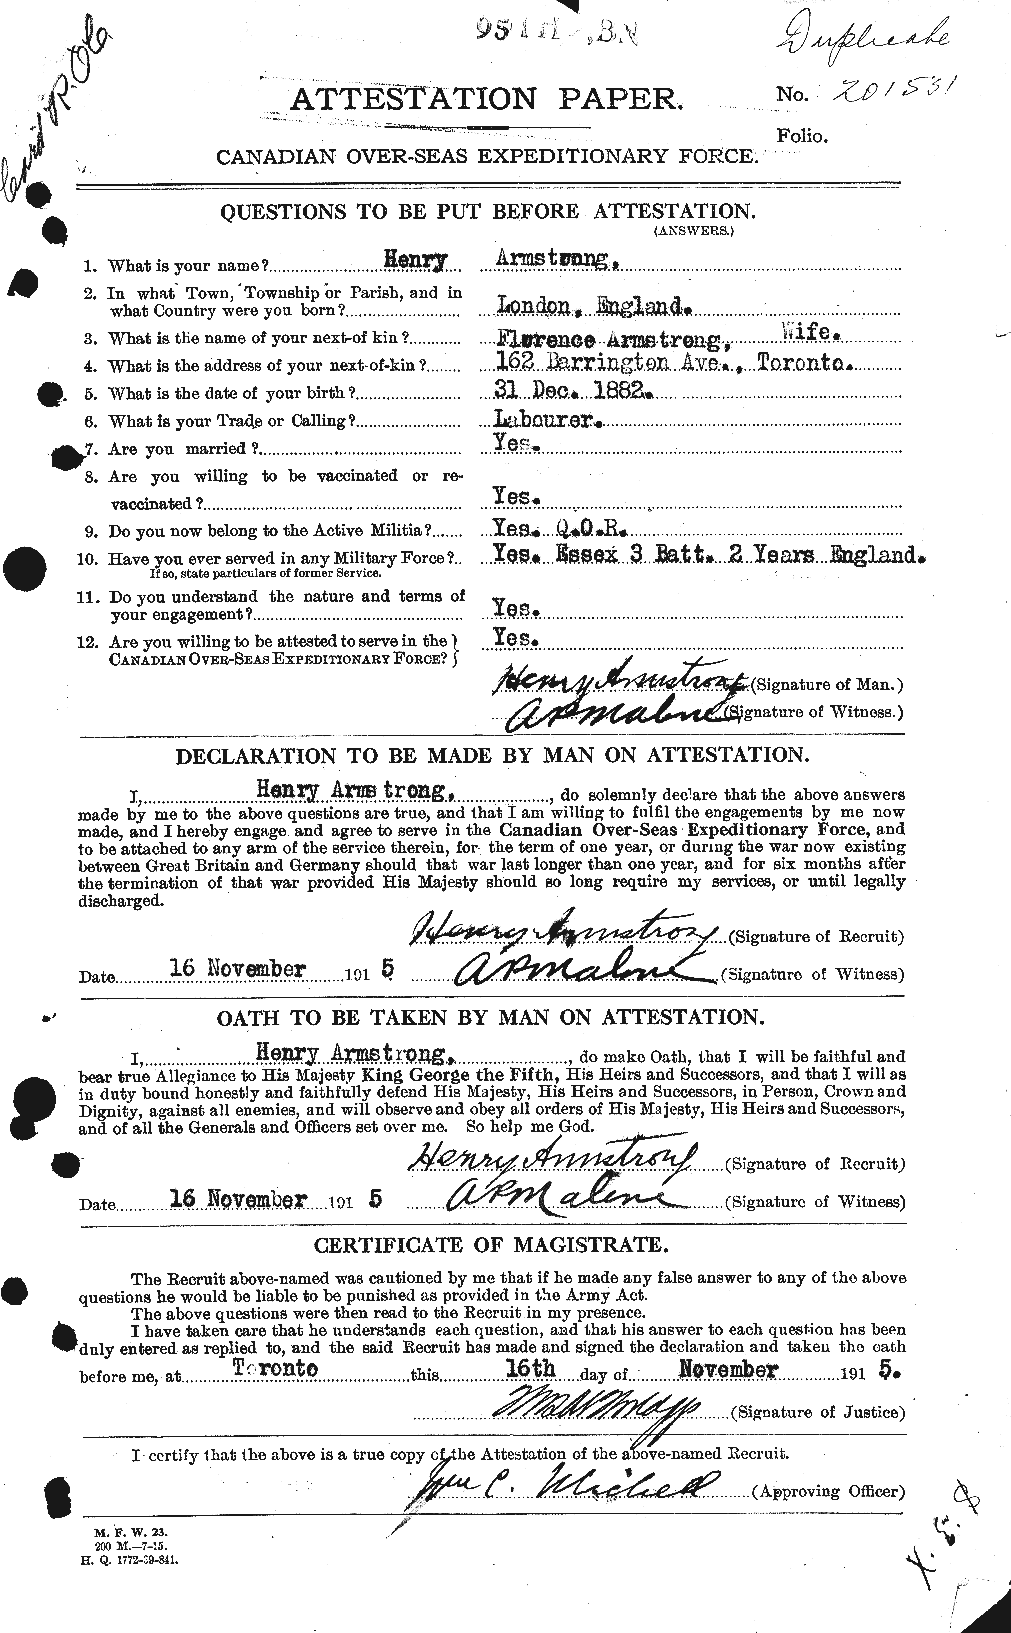 Personnel Records of the First World War - CEF 212957a